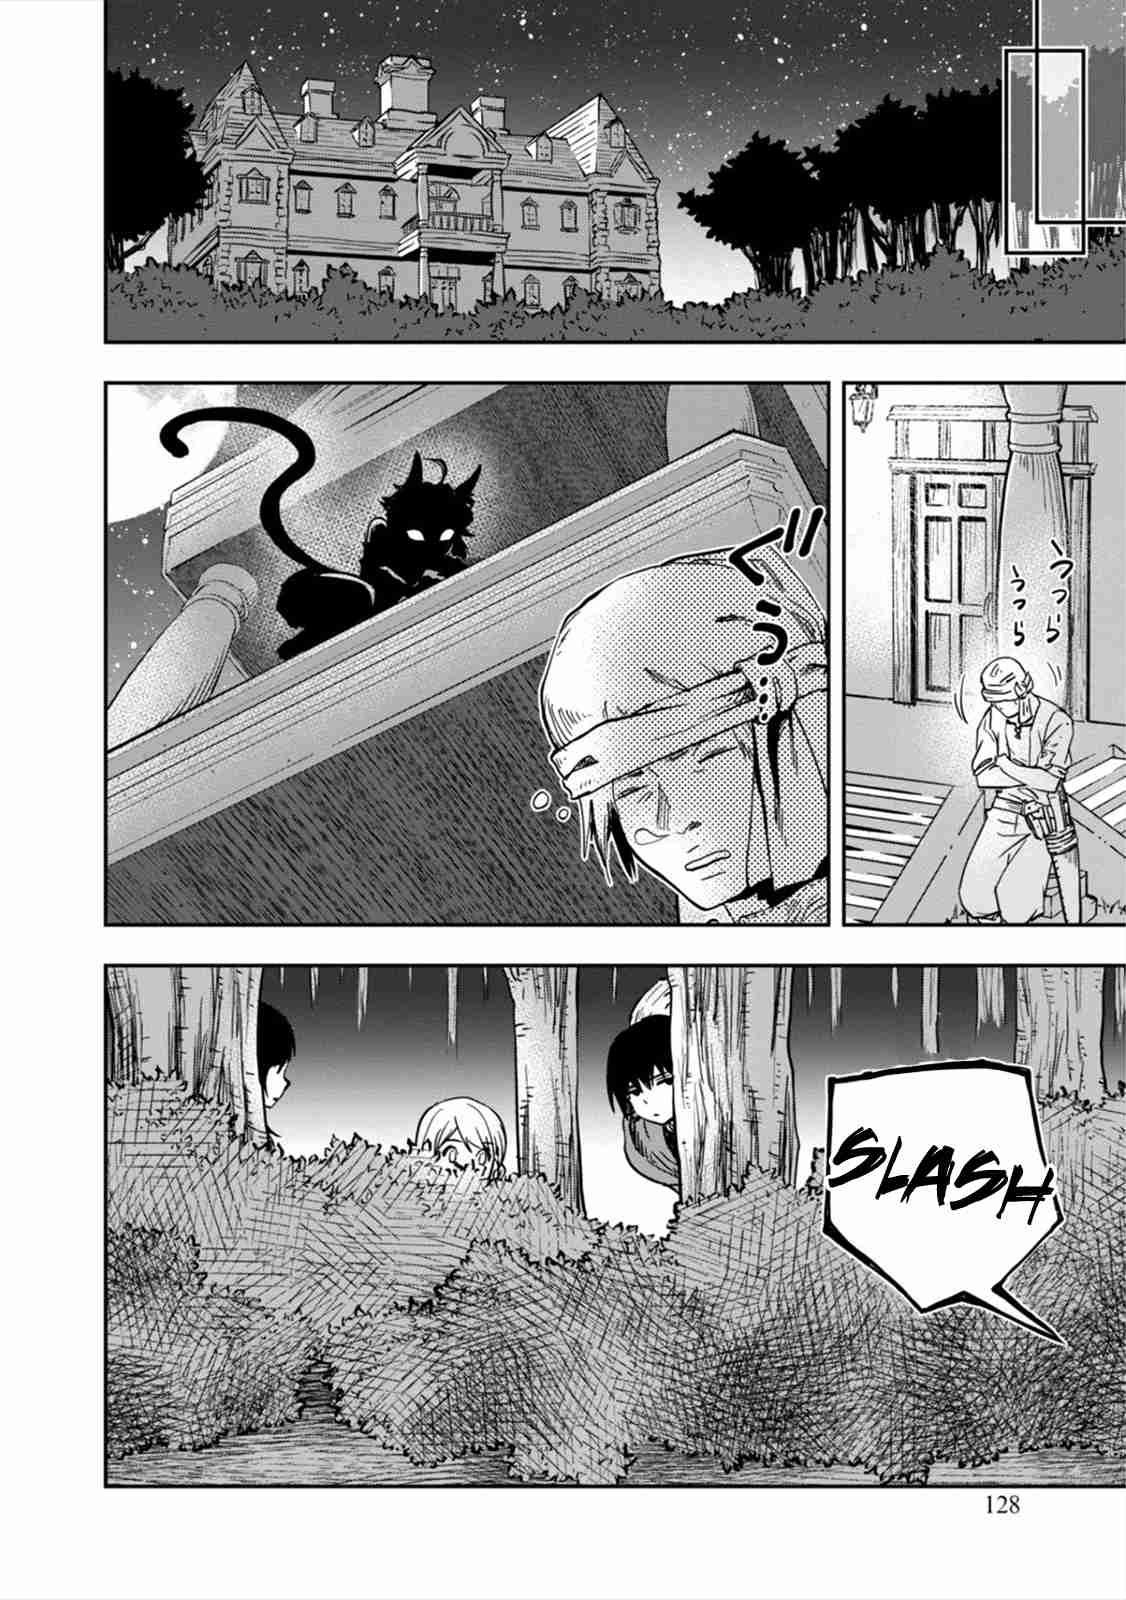 Is It Odd That I Became An Adventurer Even If I Graduated From The Witchcraft Institute? Vol. 1 Ch. 3